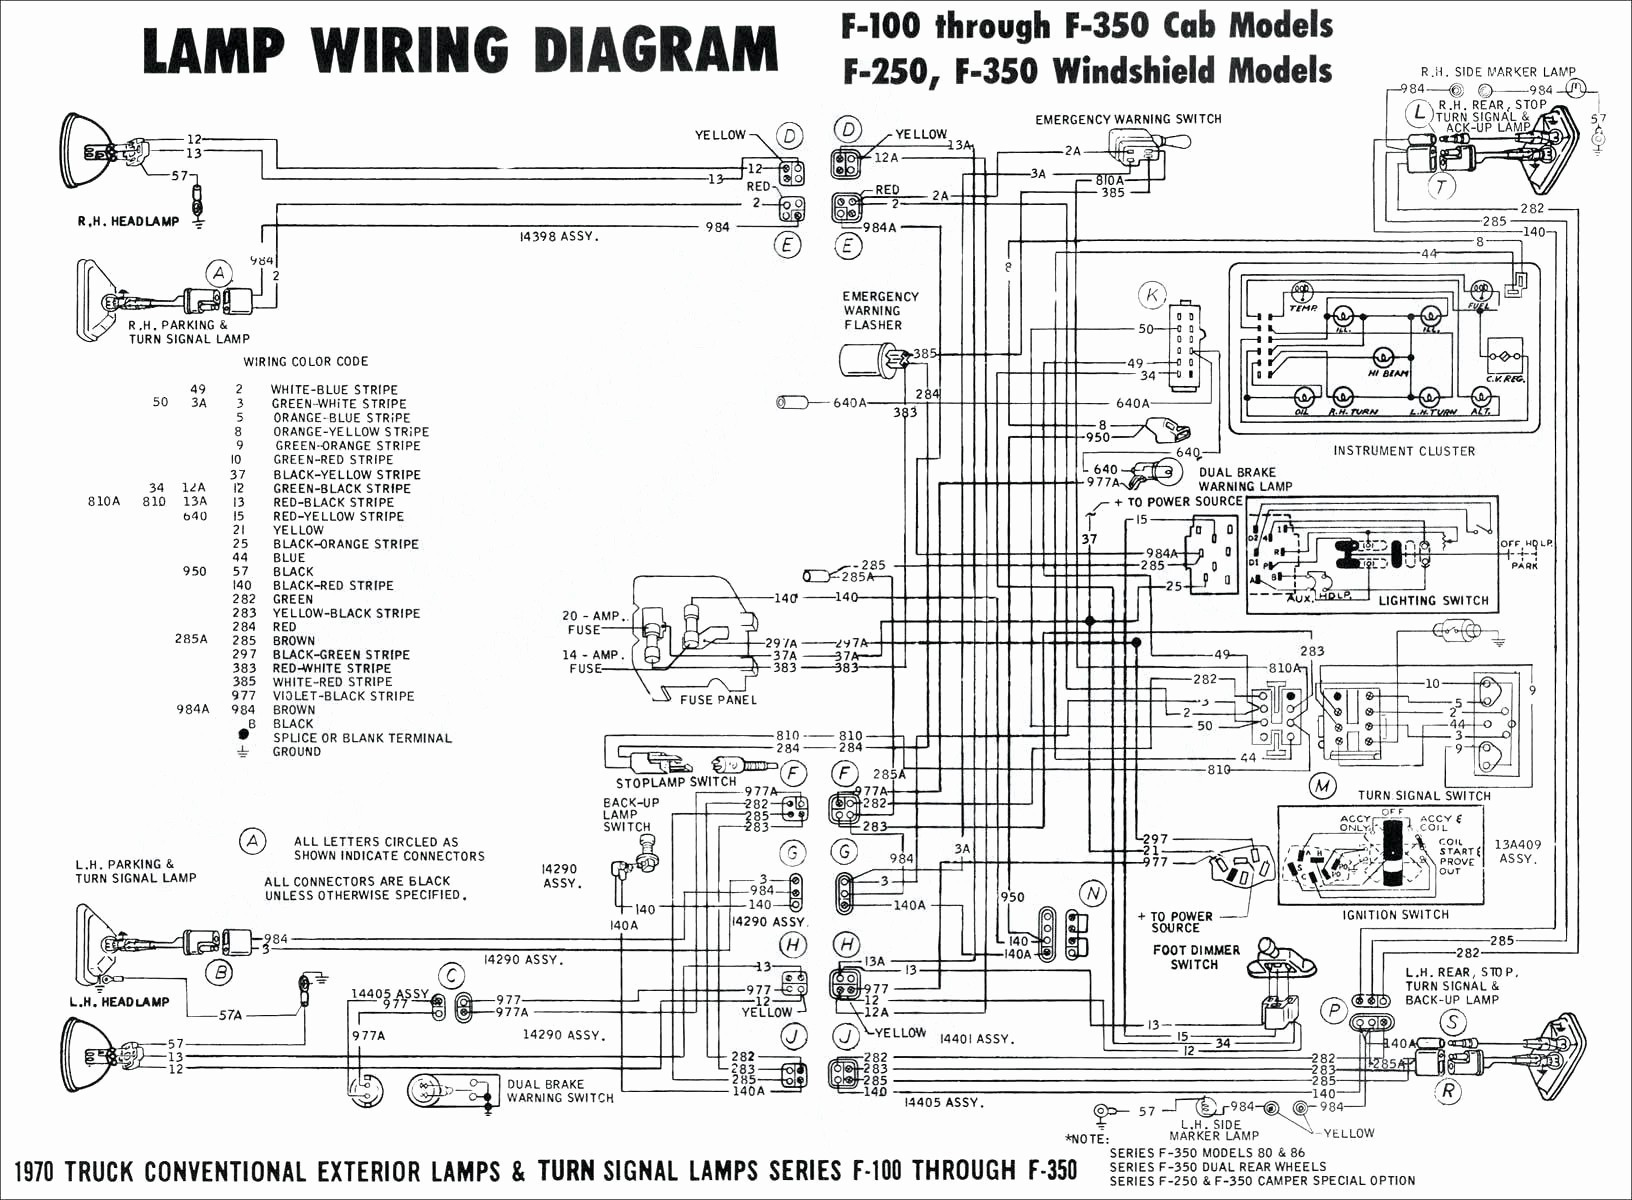 Auto Ac Diagram Wiring Diagram In Addition Automotive Air Conditioning System